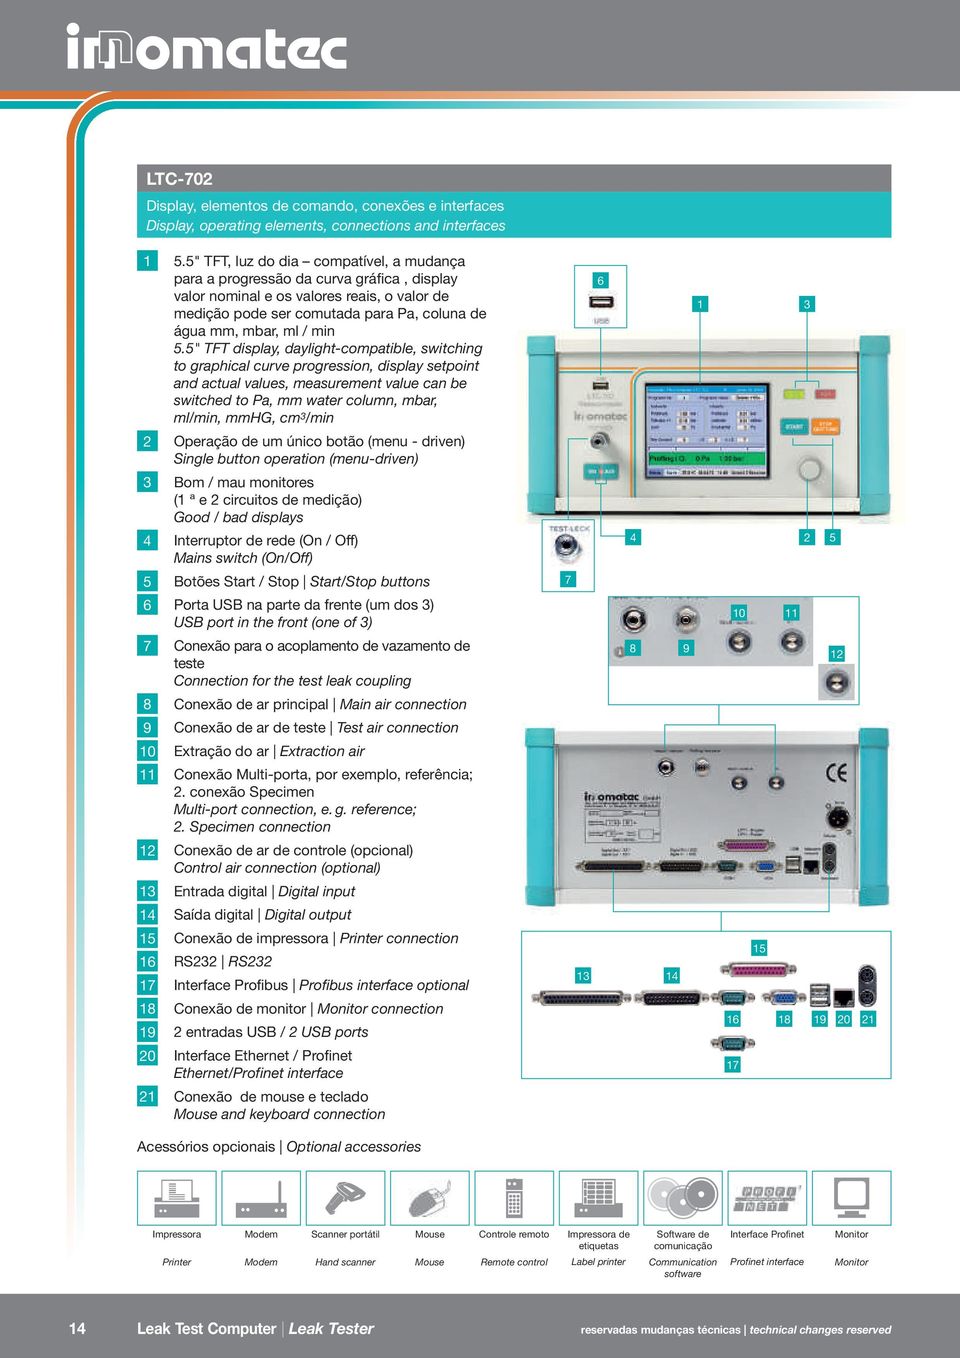 5.5" TFT display, daylight-compatible, switching to graphical curve progression, display setpoint and actual values, measurement value can be switched to Pa, mm water column, mbar, ml/min, mmhg, cm 3